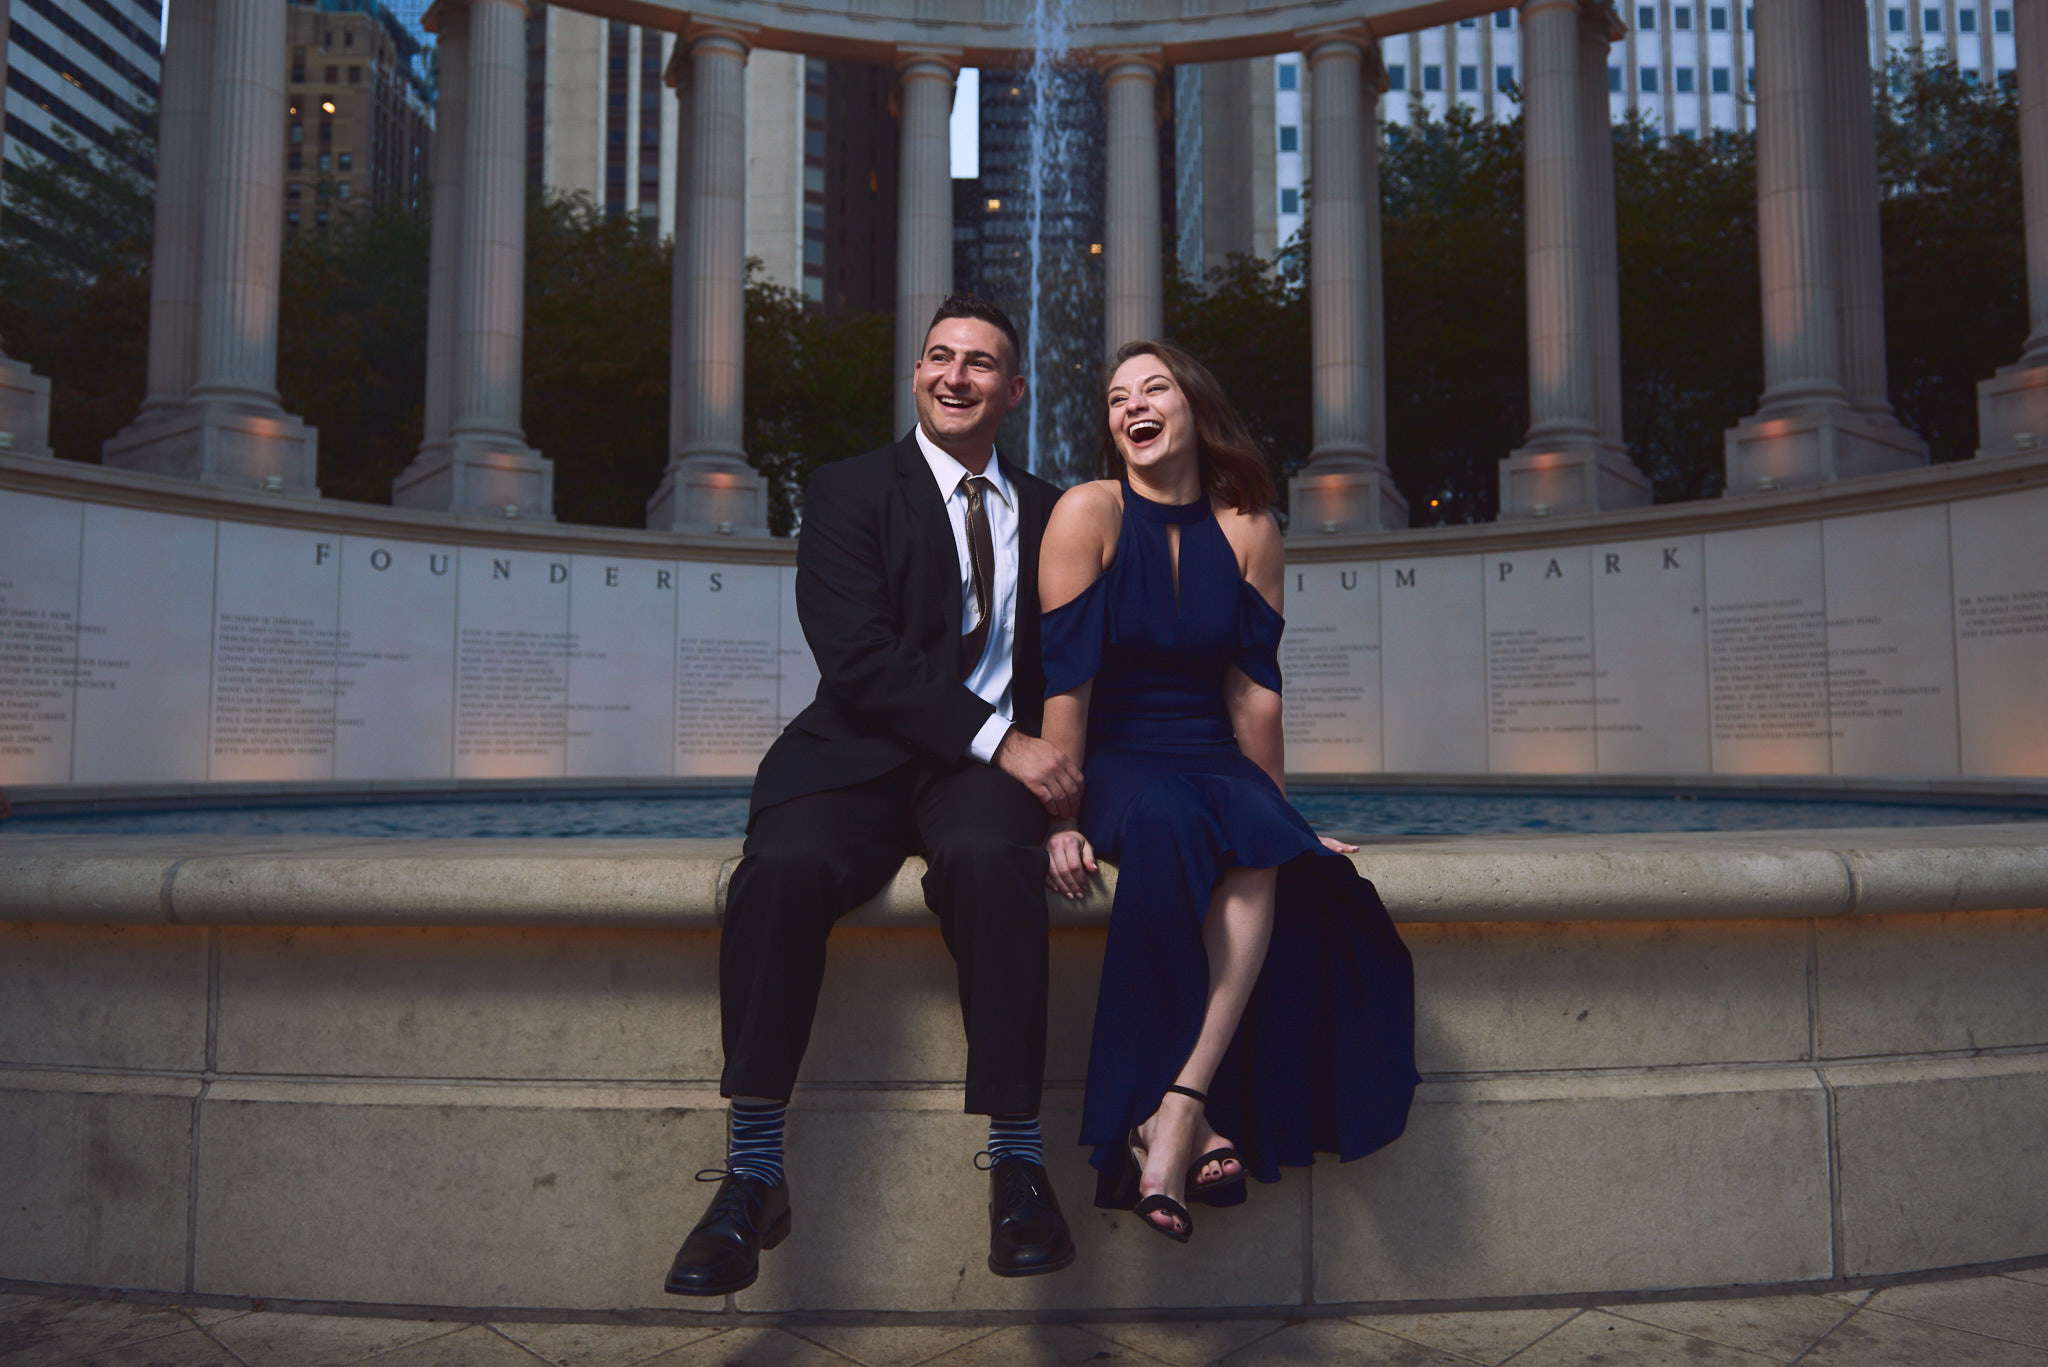 Laughing engagement portrait at Wrigley Square